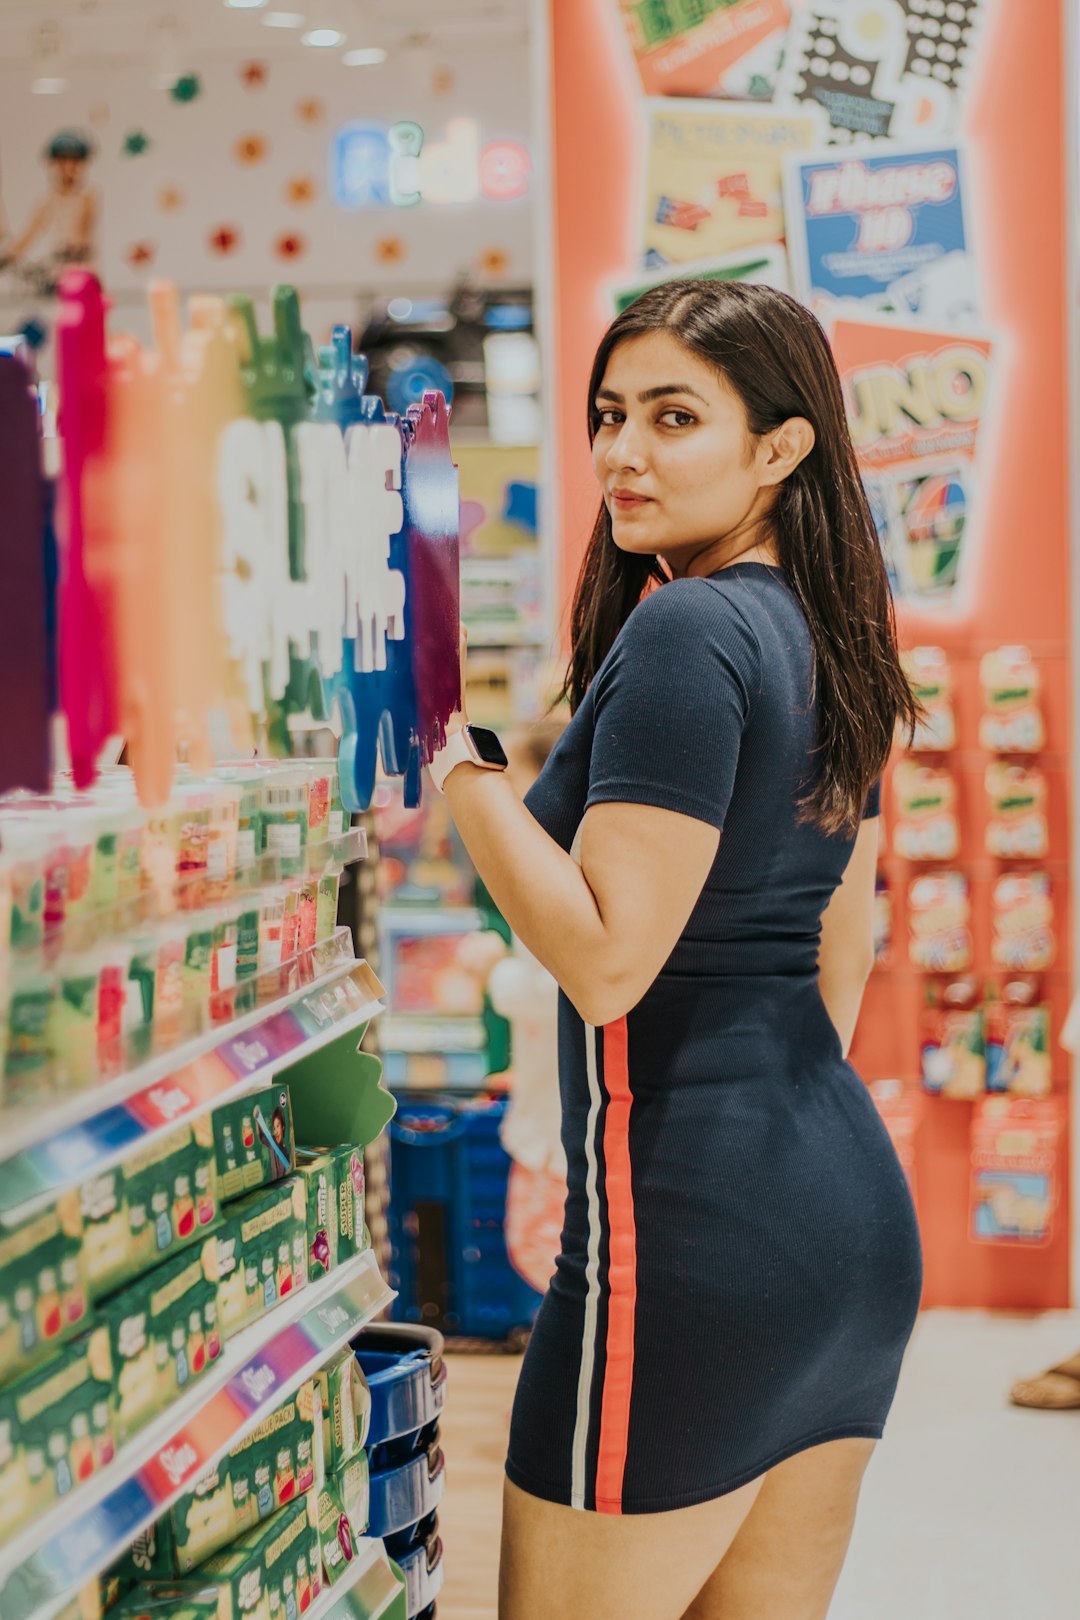 woman in blue shirt and black and red striped pants standing near store